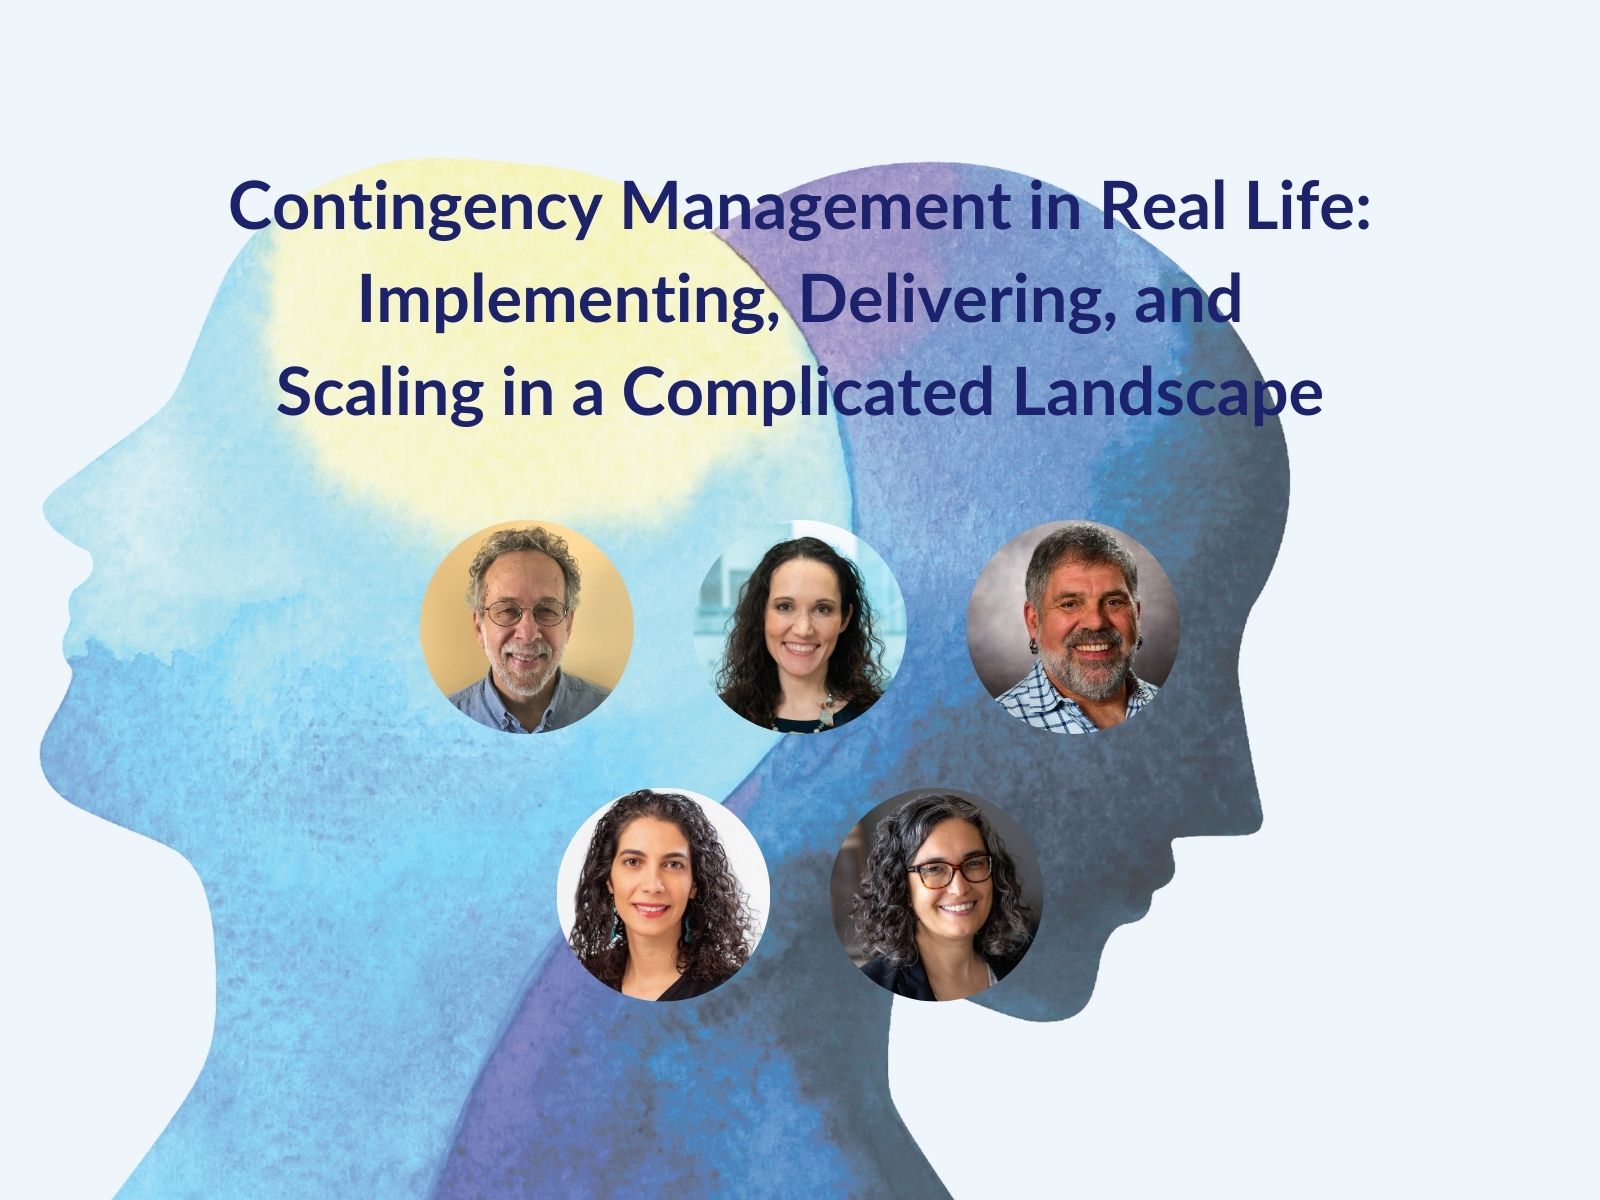 Title of the second panel is Contingency Management in Real Life: Implementing, Delivering, and Scaling in a Complicated Landscape.